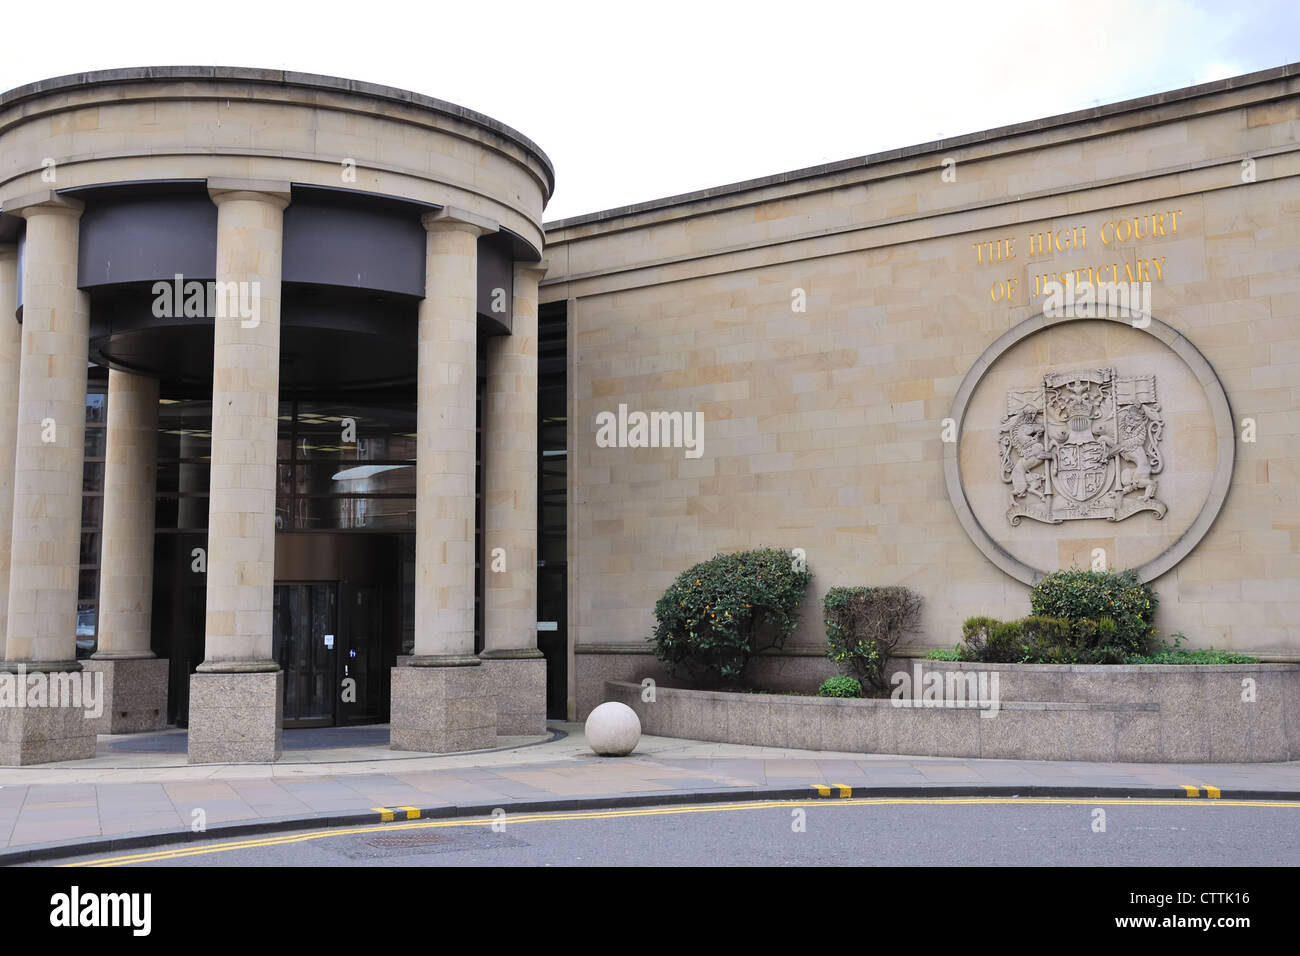 The entrance and wall motif of the High Court in Glasgow, Scotland, UK Stock Photo